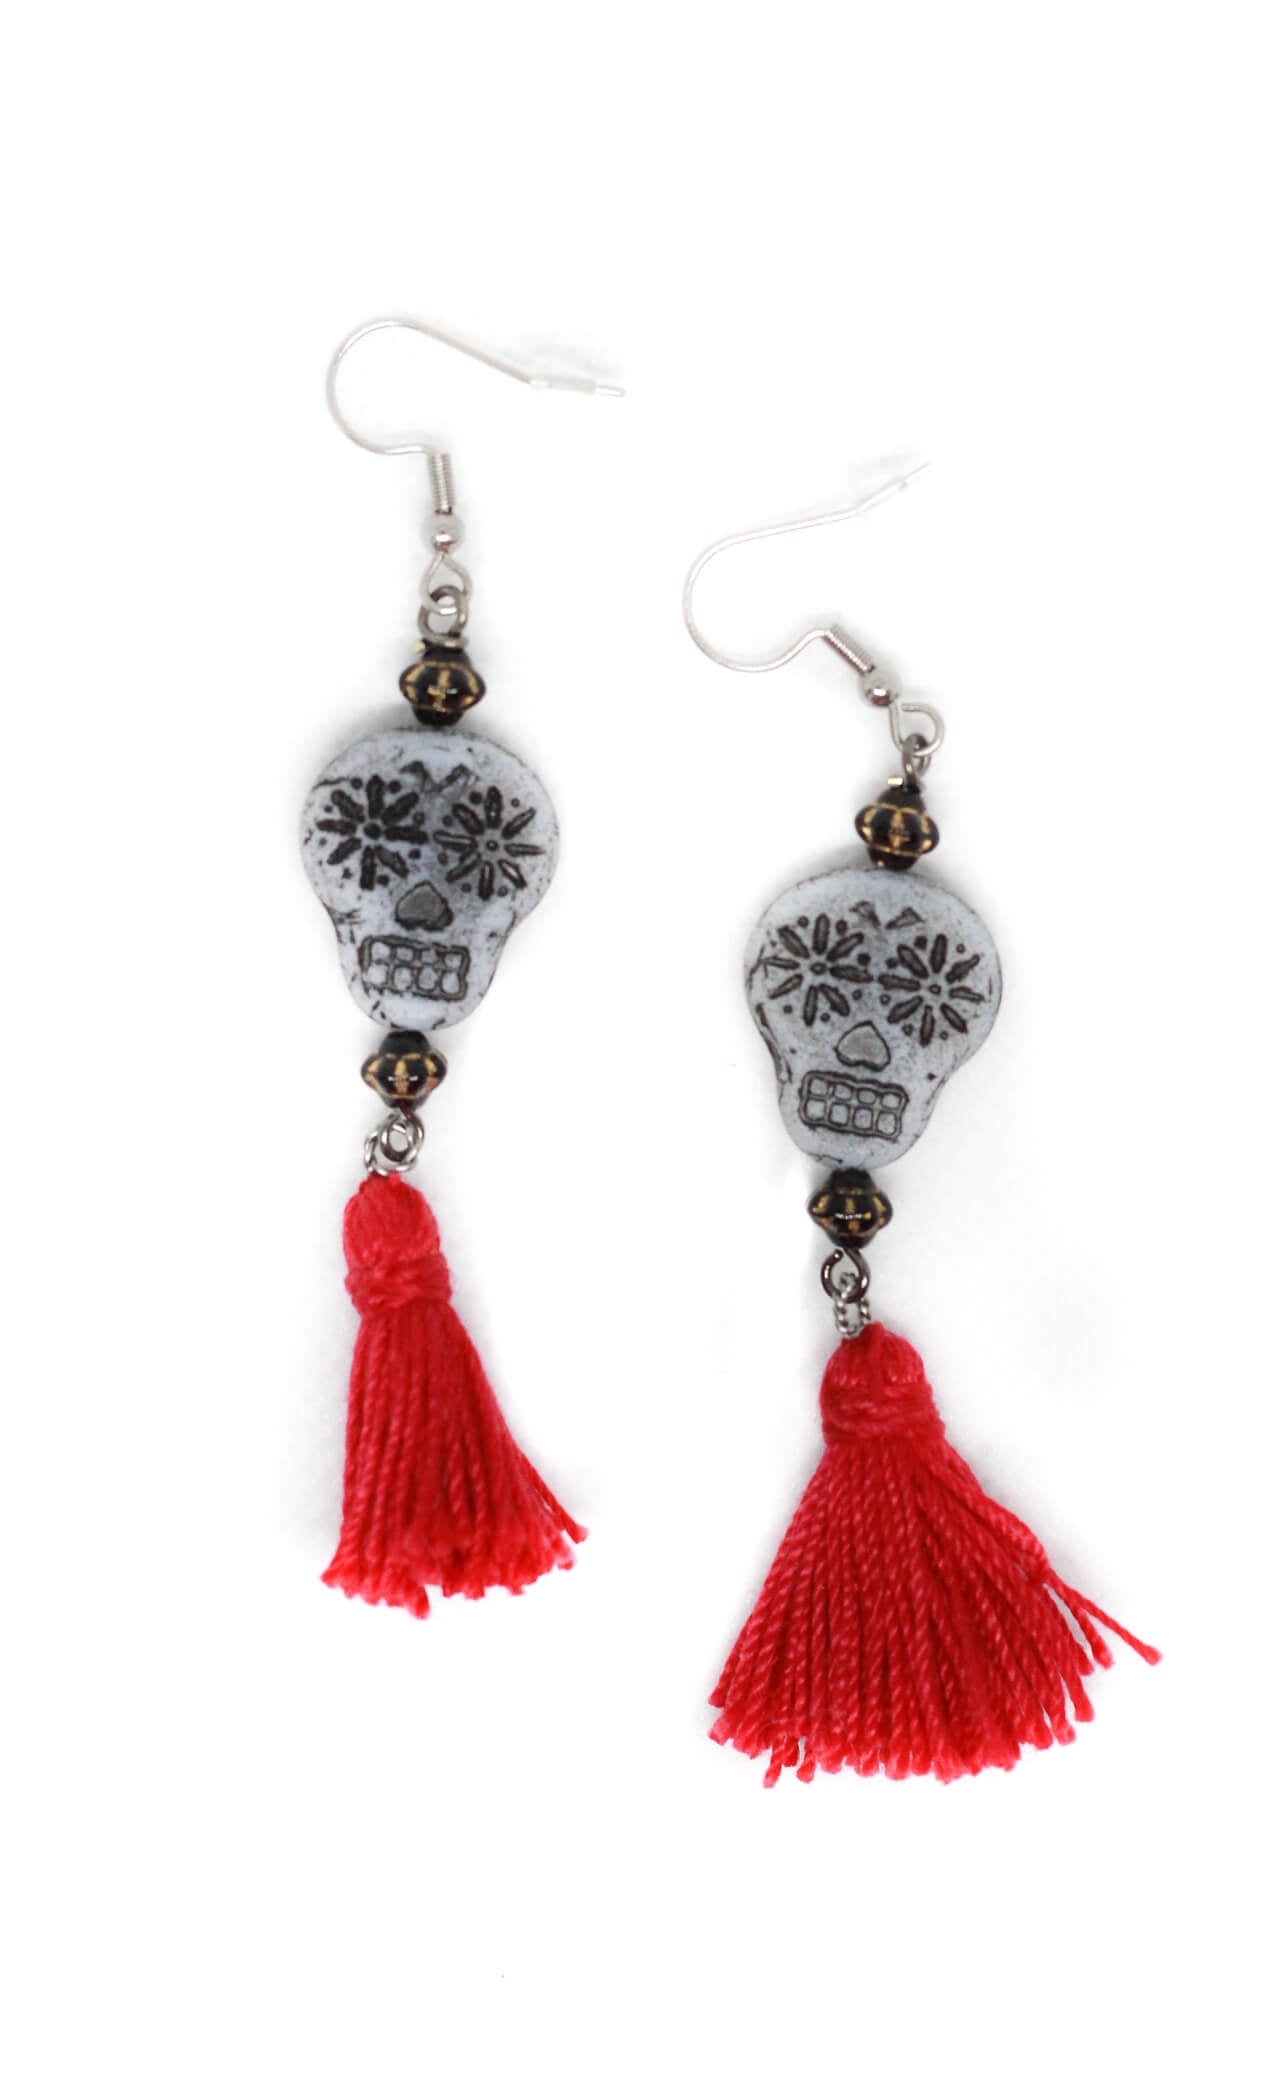 Sugar Skull Earrings with Red Tassels by Kaleidoscopes And Polka Dots